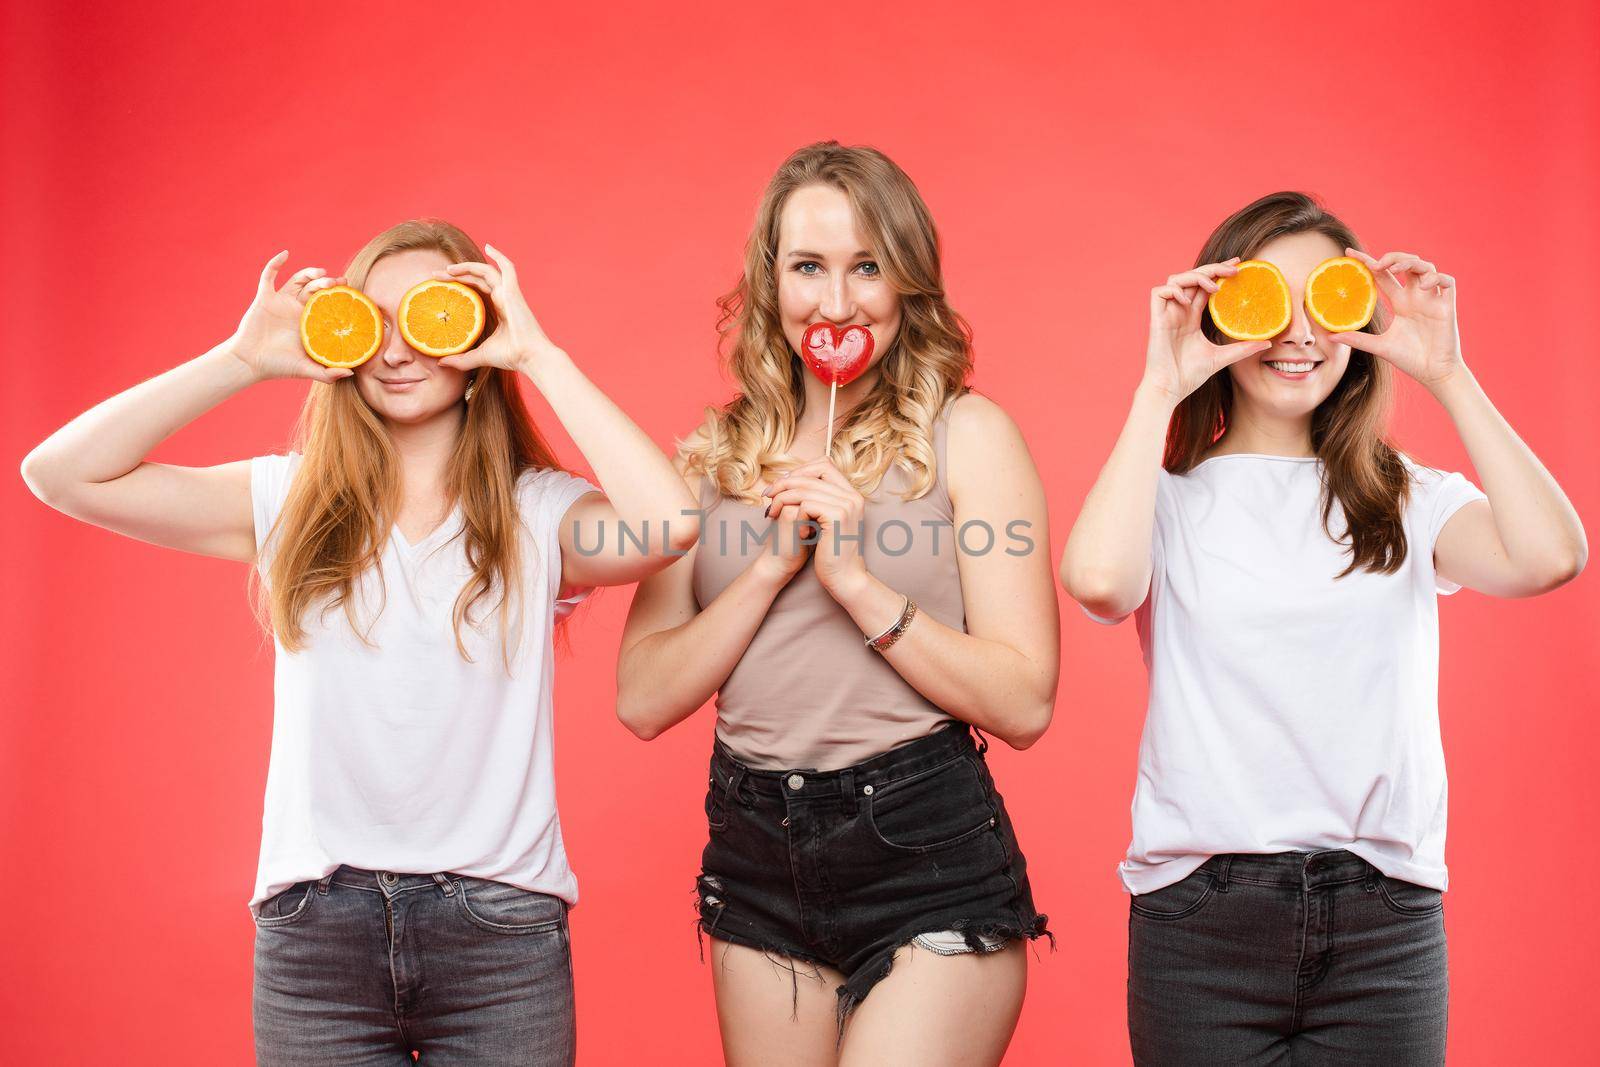 Stock photo of a beautiful girl with a red heart-shaped lollipop between two smiling girls with halved cut oranges. They are isolate on red background.